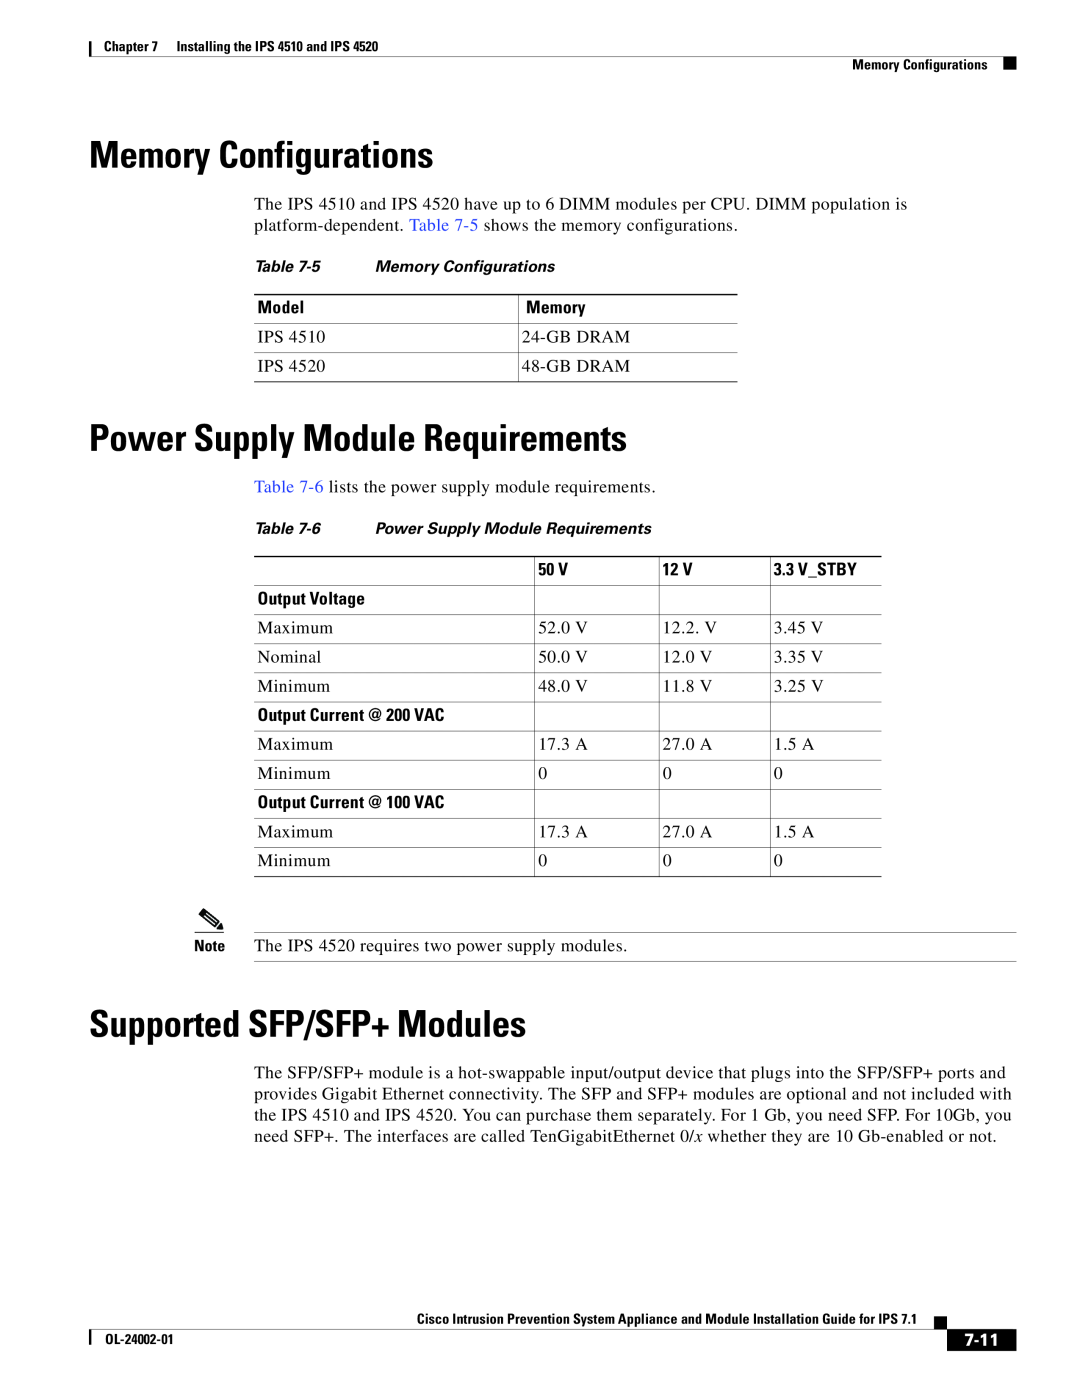 Cisco Systems IPS4520K9 Memory Configurations, Power Supply Module Requirements, Supported SFP/SFP+ Modules, Model, V Stby 